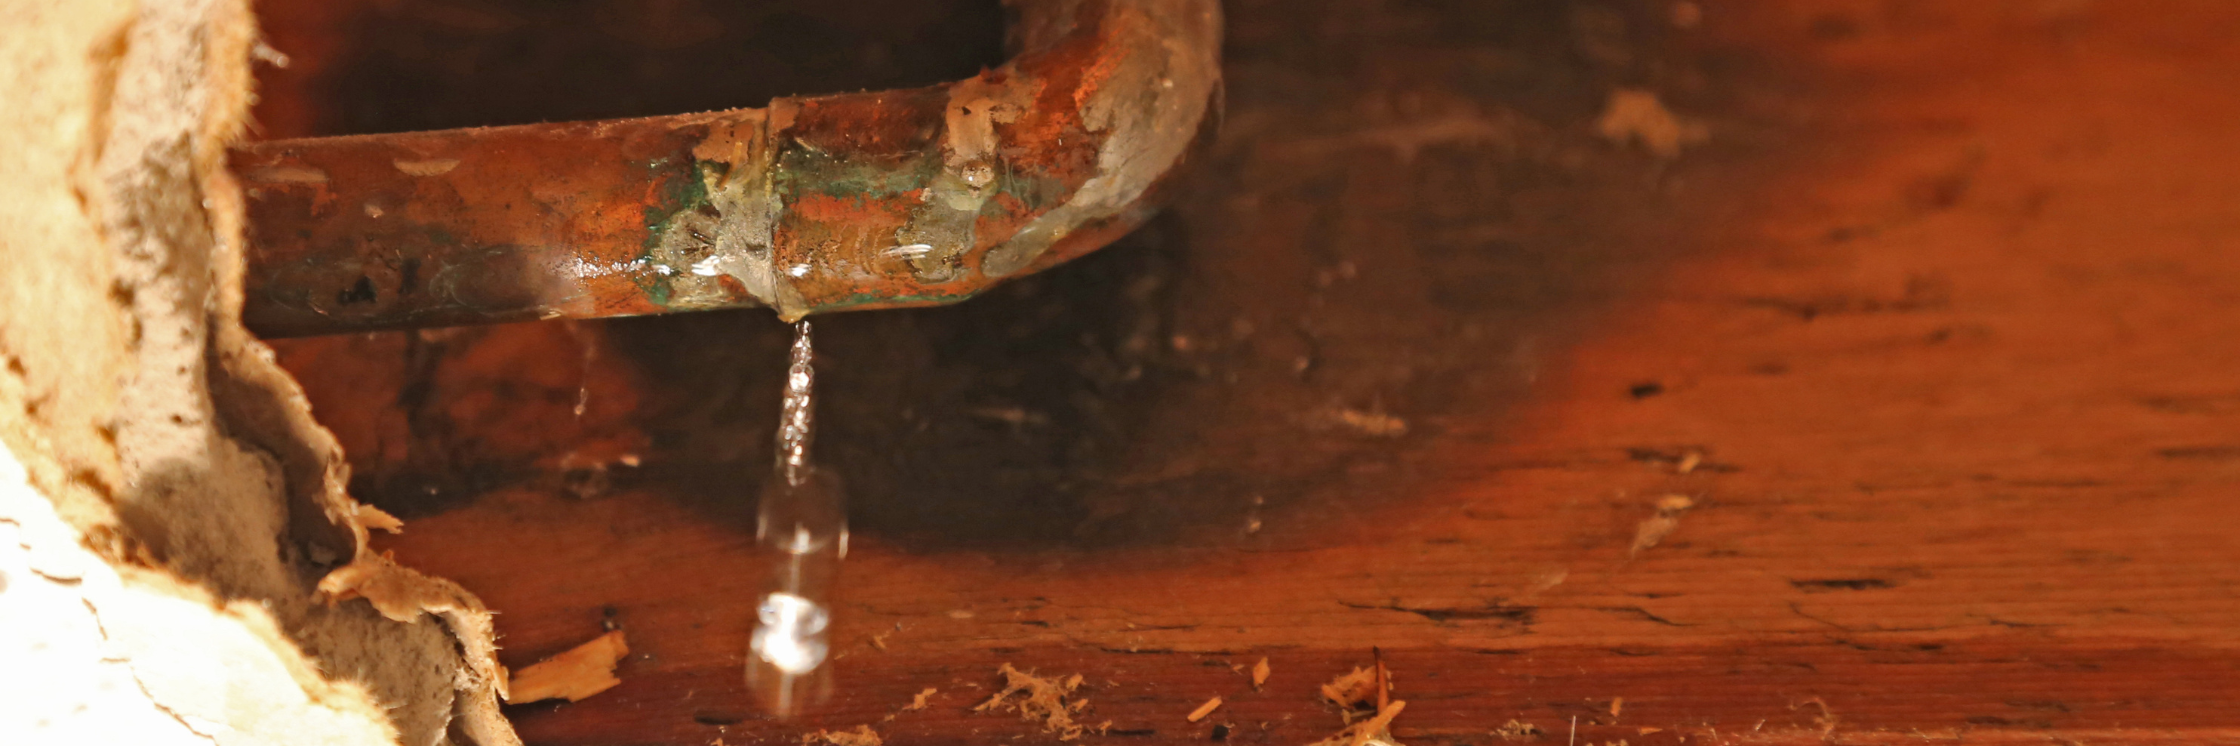 How To Tell if You Have a Leaky Pipe